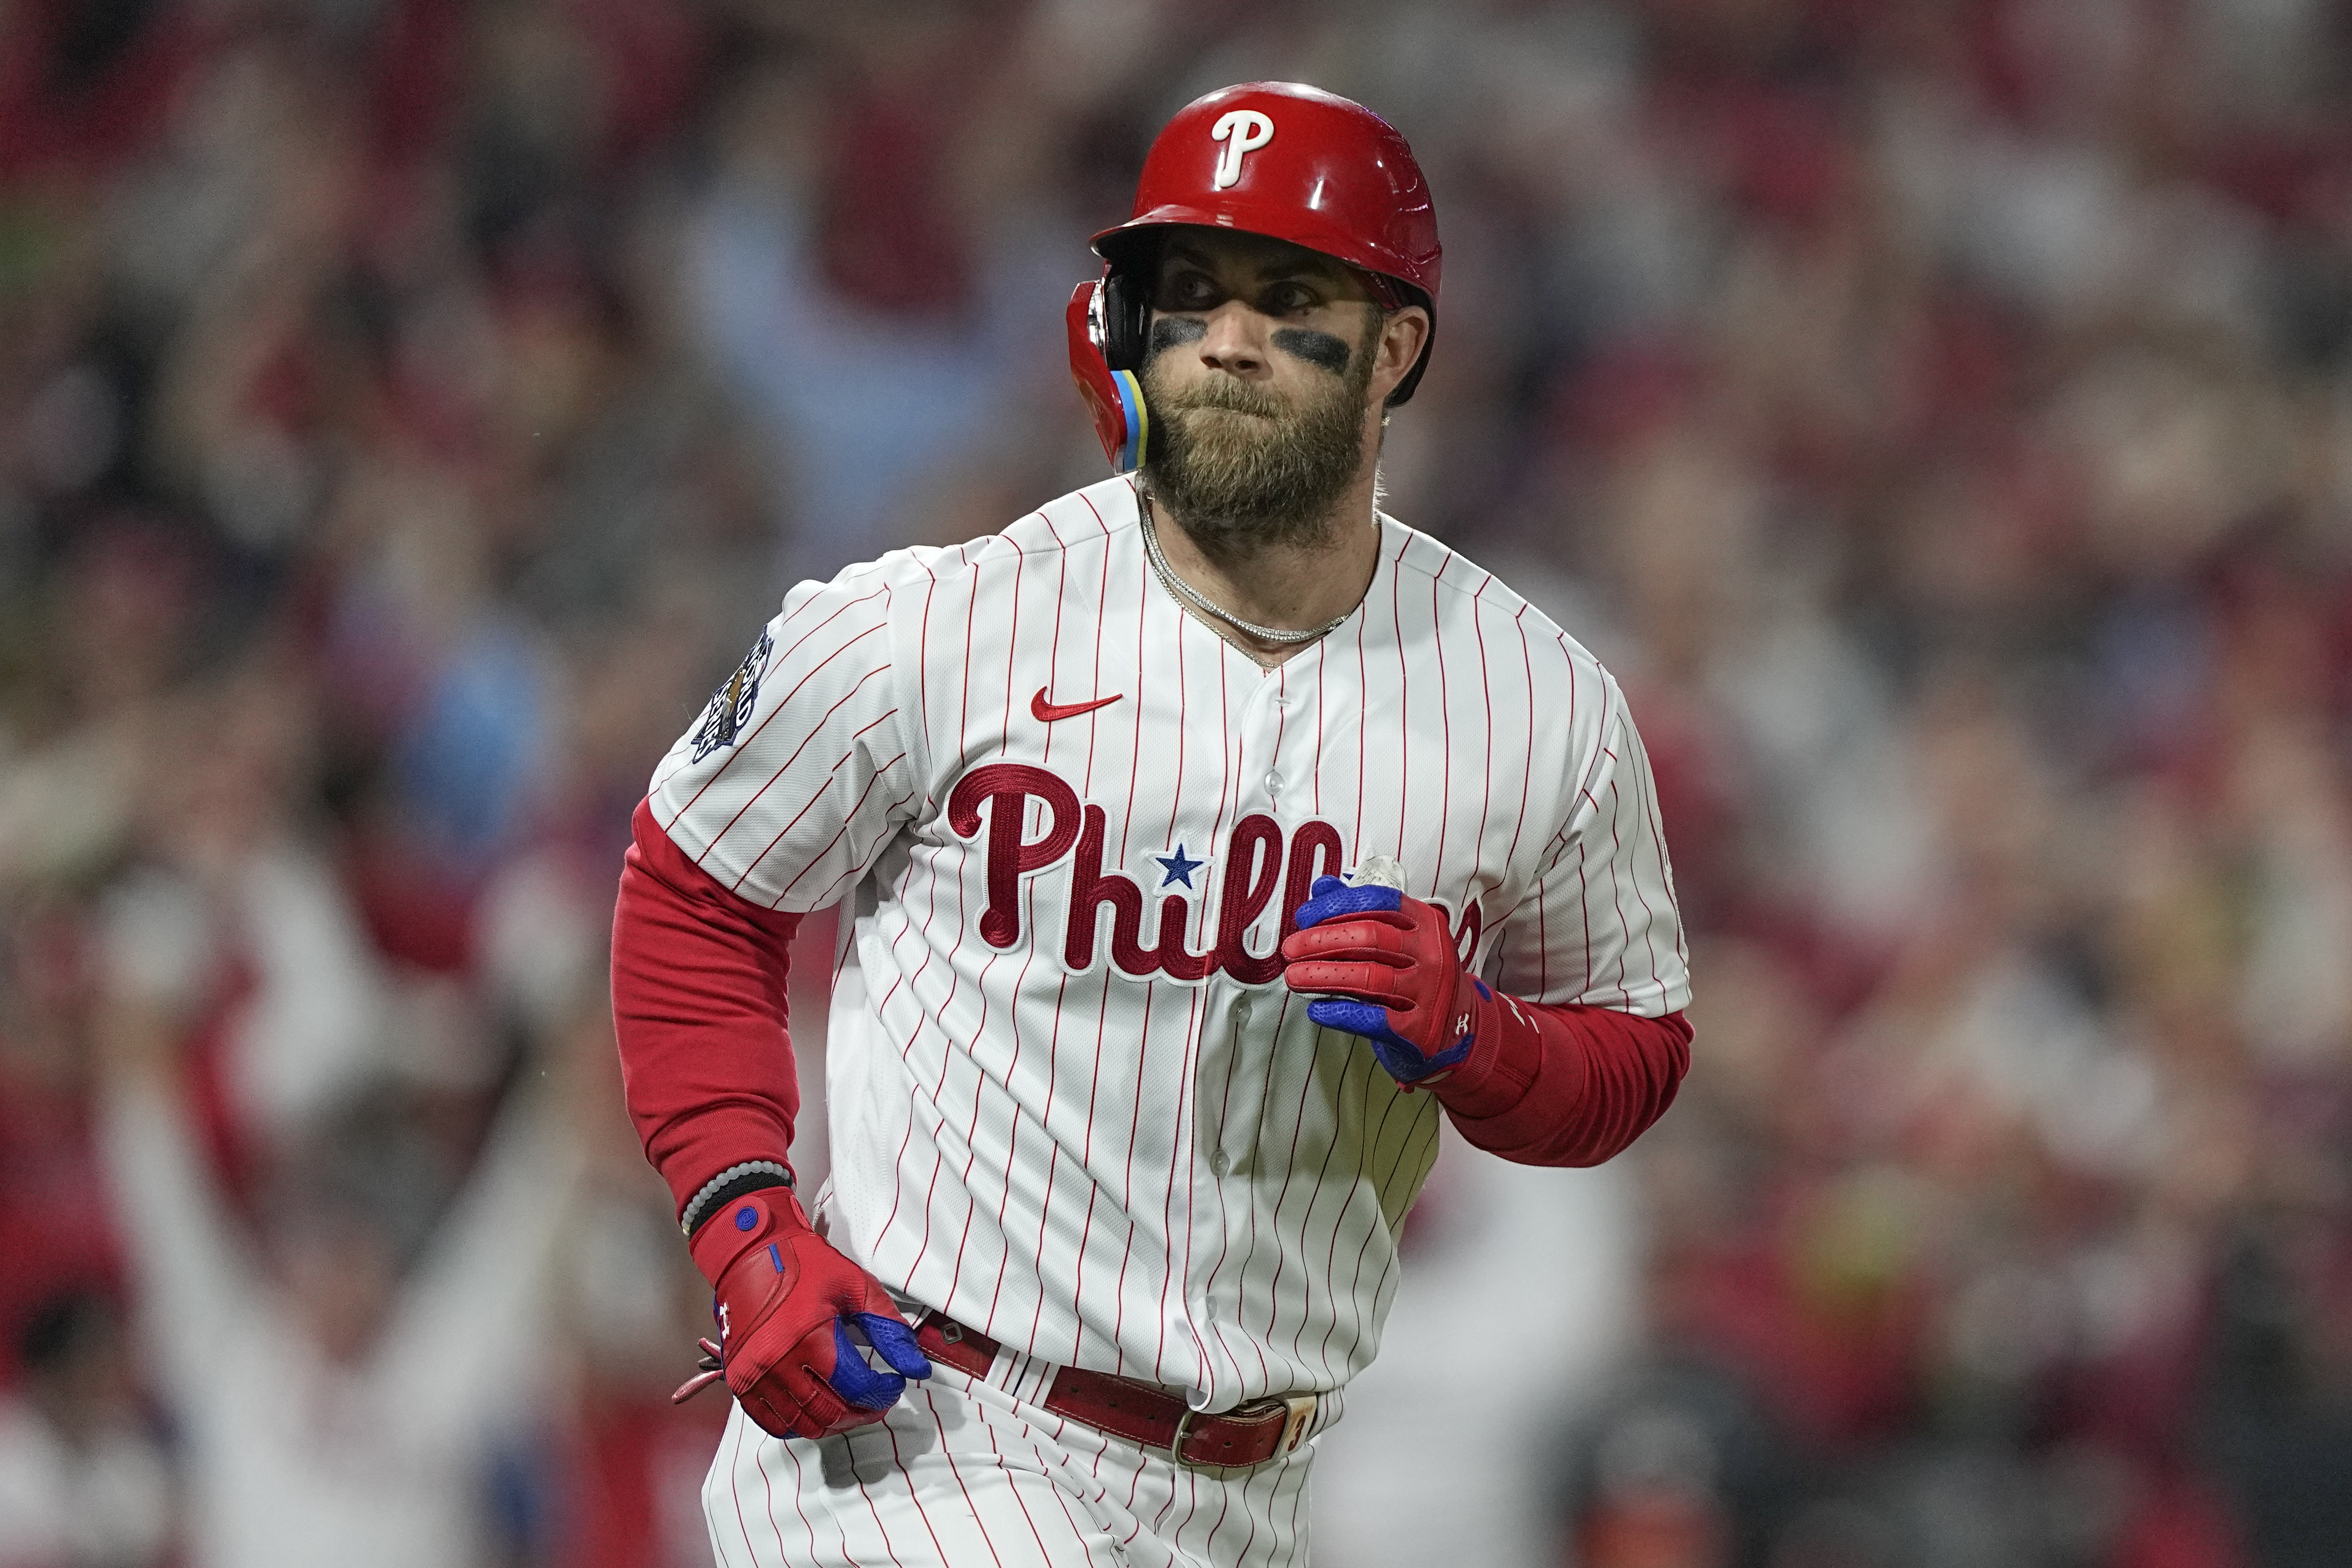 FILE 0 - In this Nov. 1, 2022 file photo, Philadelphia Phillies' Bryce Harper runs the bases after hitting a two-run home run in Game 3 of the World Series against the Houston Astros.  On Thursday, March 30, 2023, the Phillies place Harper on the 10-day disabled list.  (AP Photo/David J. Phillip, File)